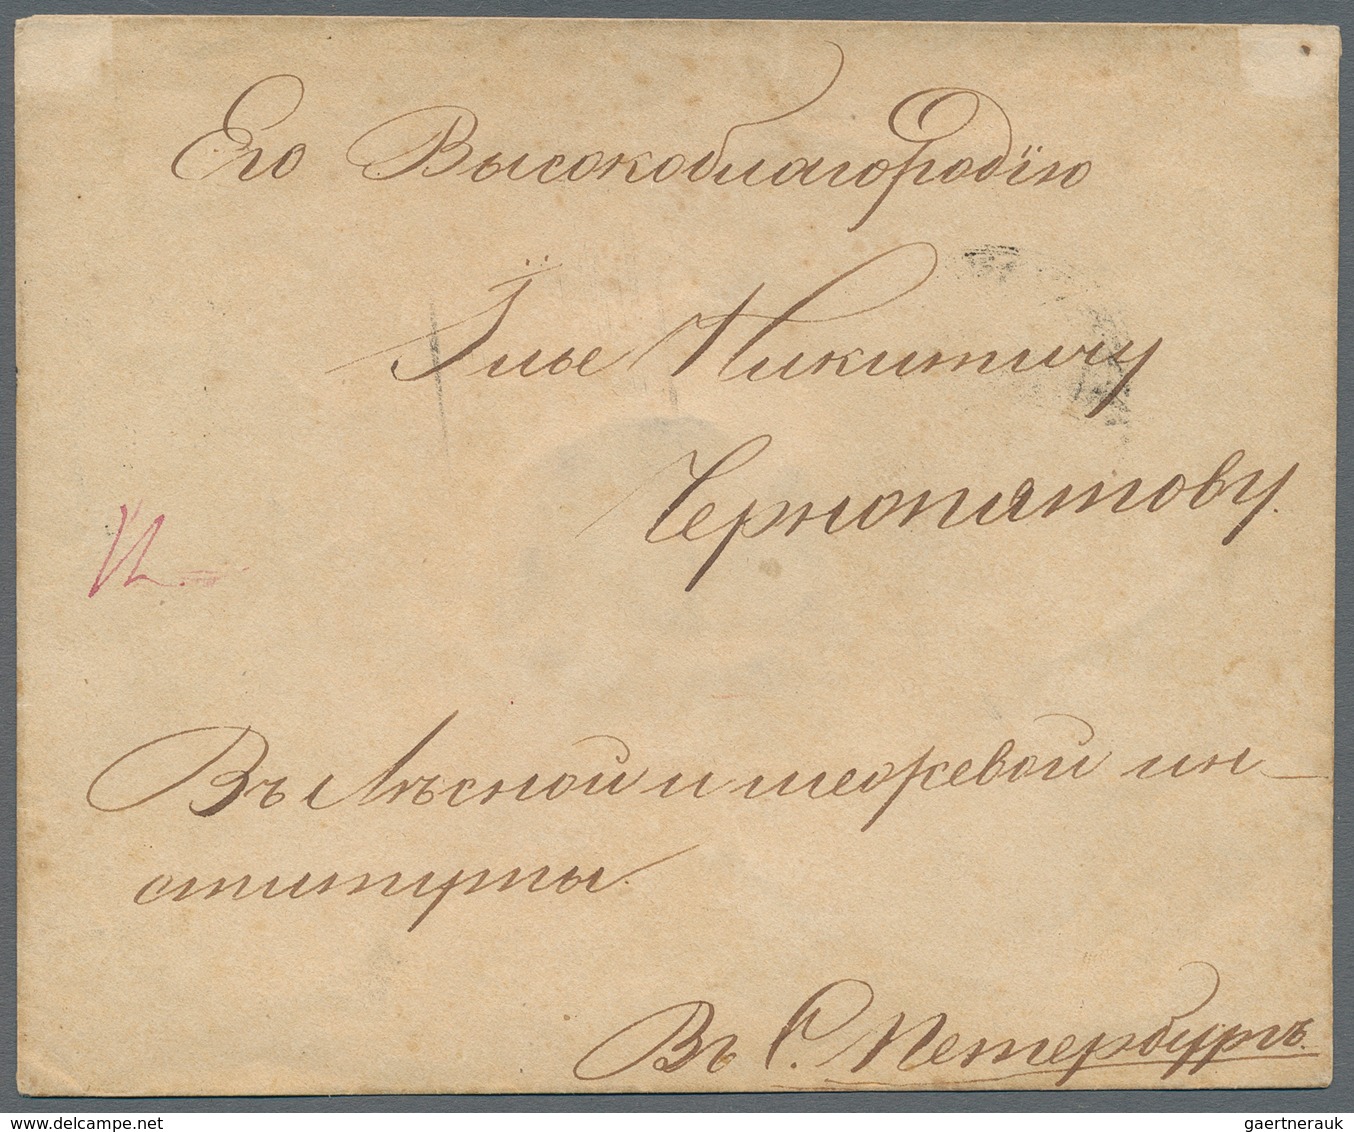 Russland - Vorphilatelie: 1845/56 four covers all sent from/to St. Petersburg with different cancels